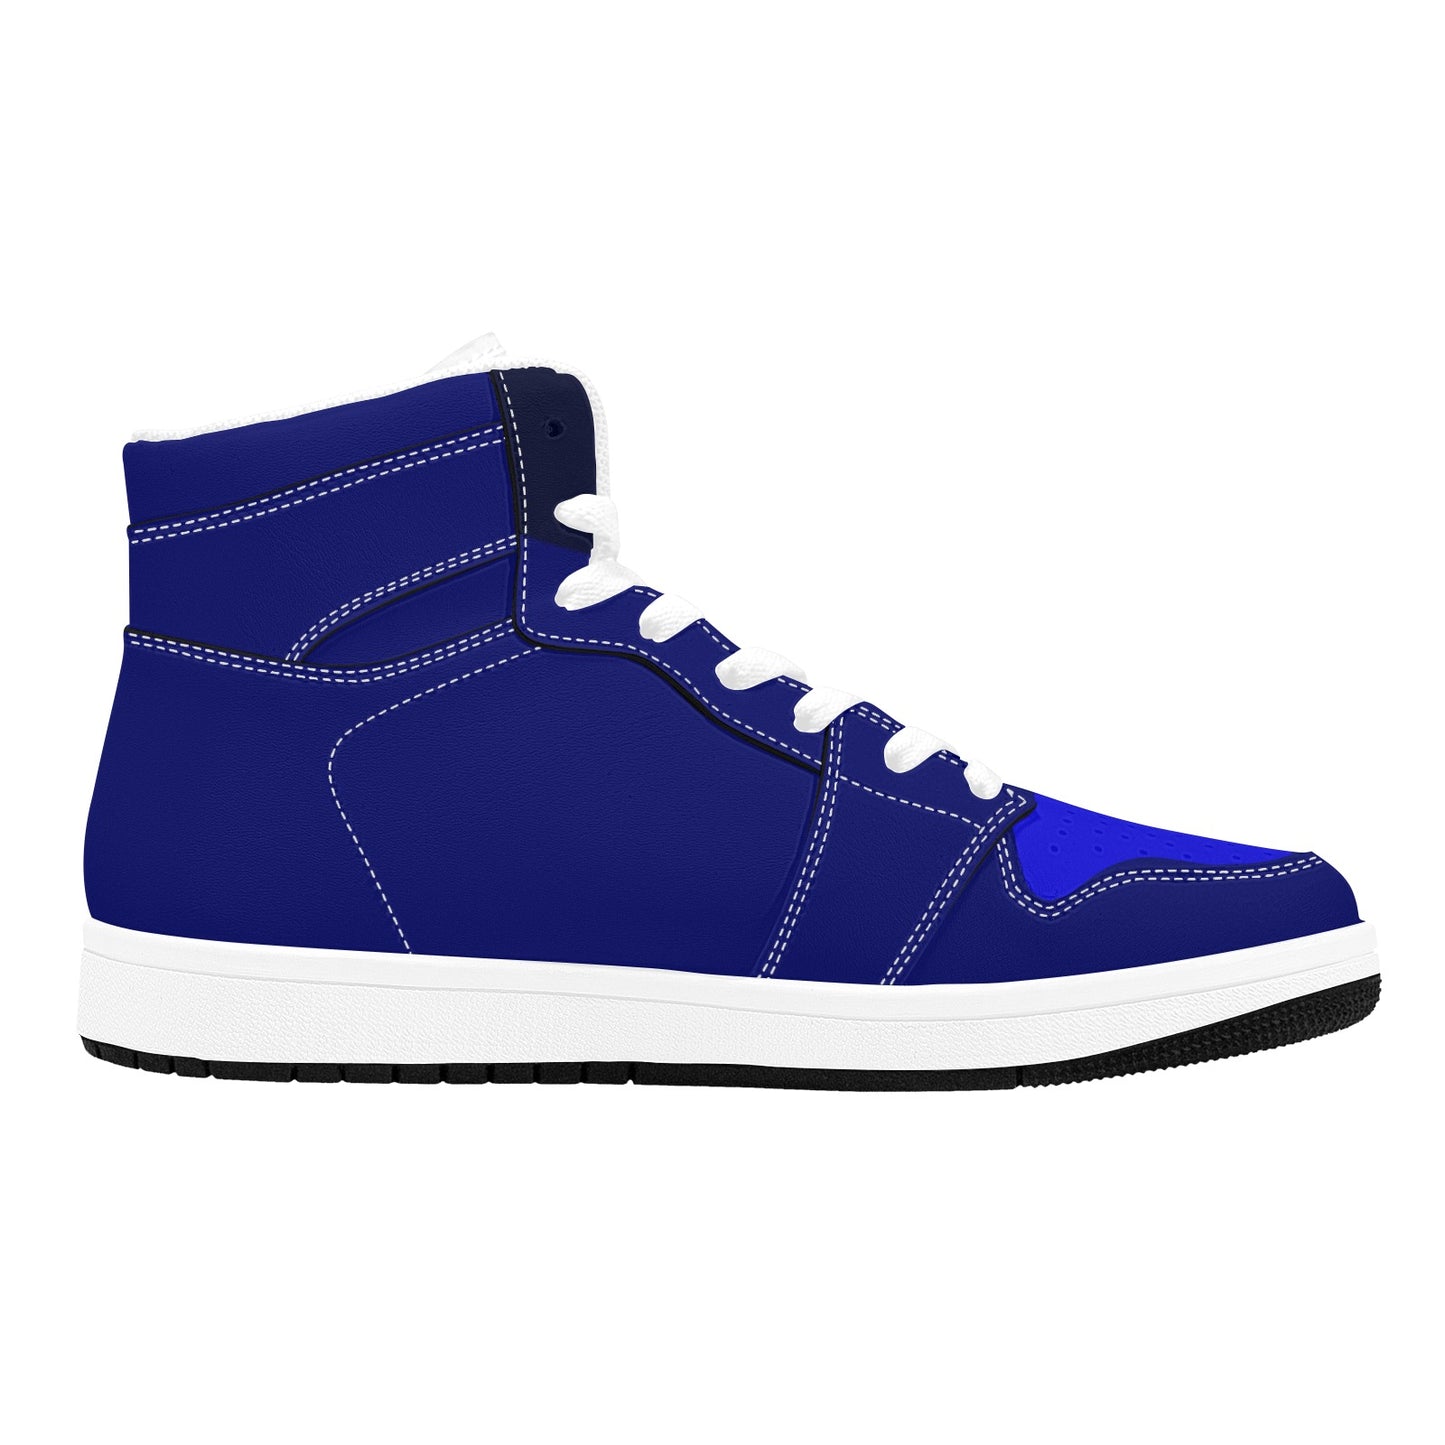 Blue High Top Sneakers Three Tone Blue Colors High Top Sneakers Men's High Top Sneakers